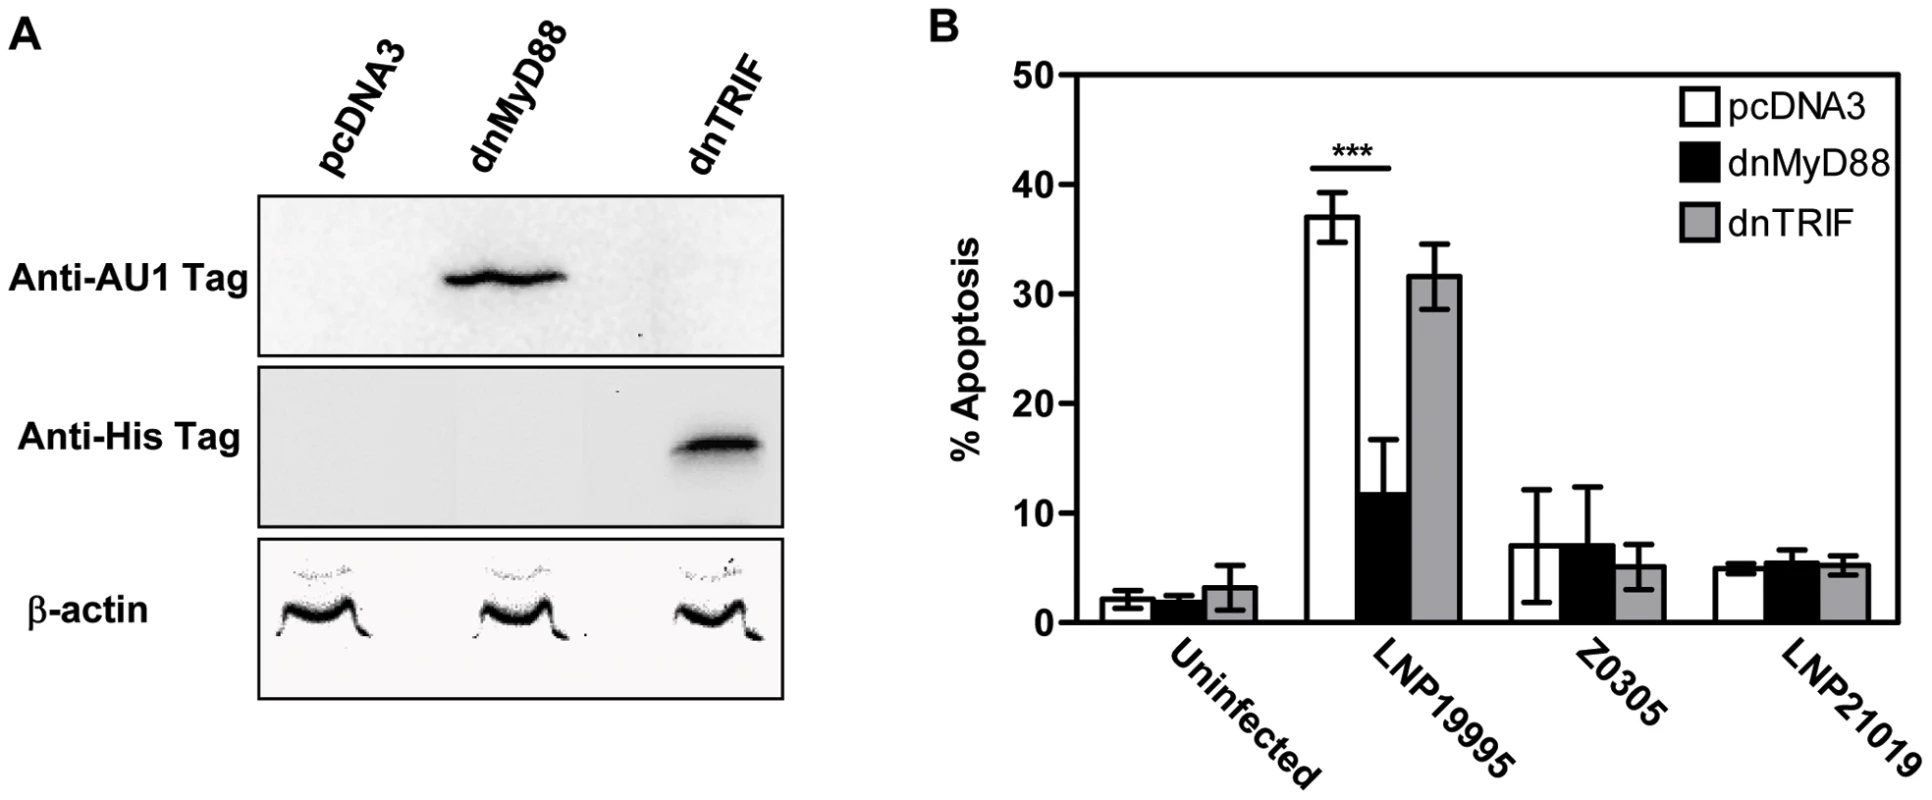 Expression of dnMyD88 but not dnTRIF inhibits ST-11-induced apoptosis.